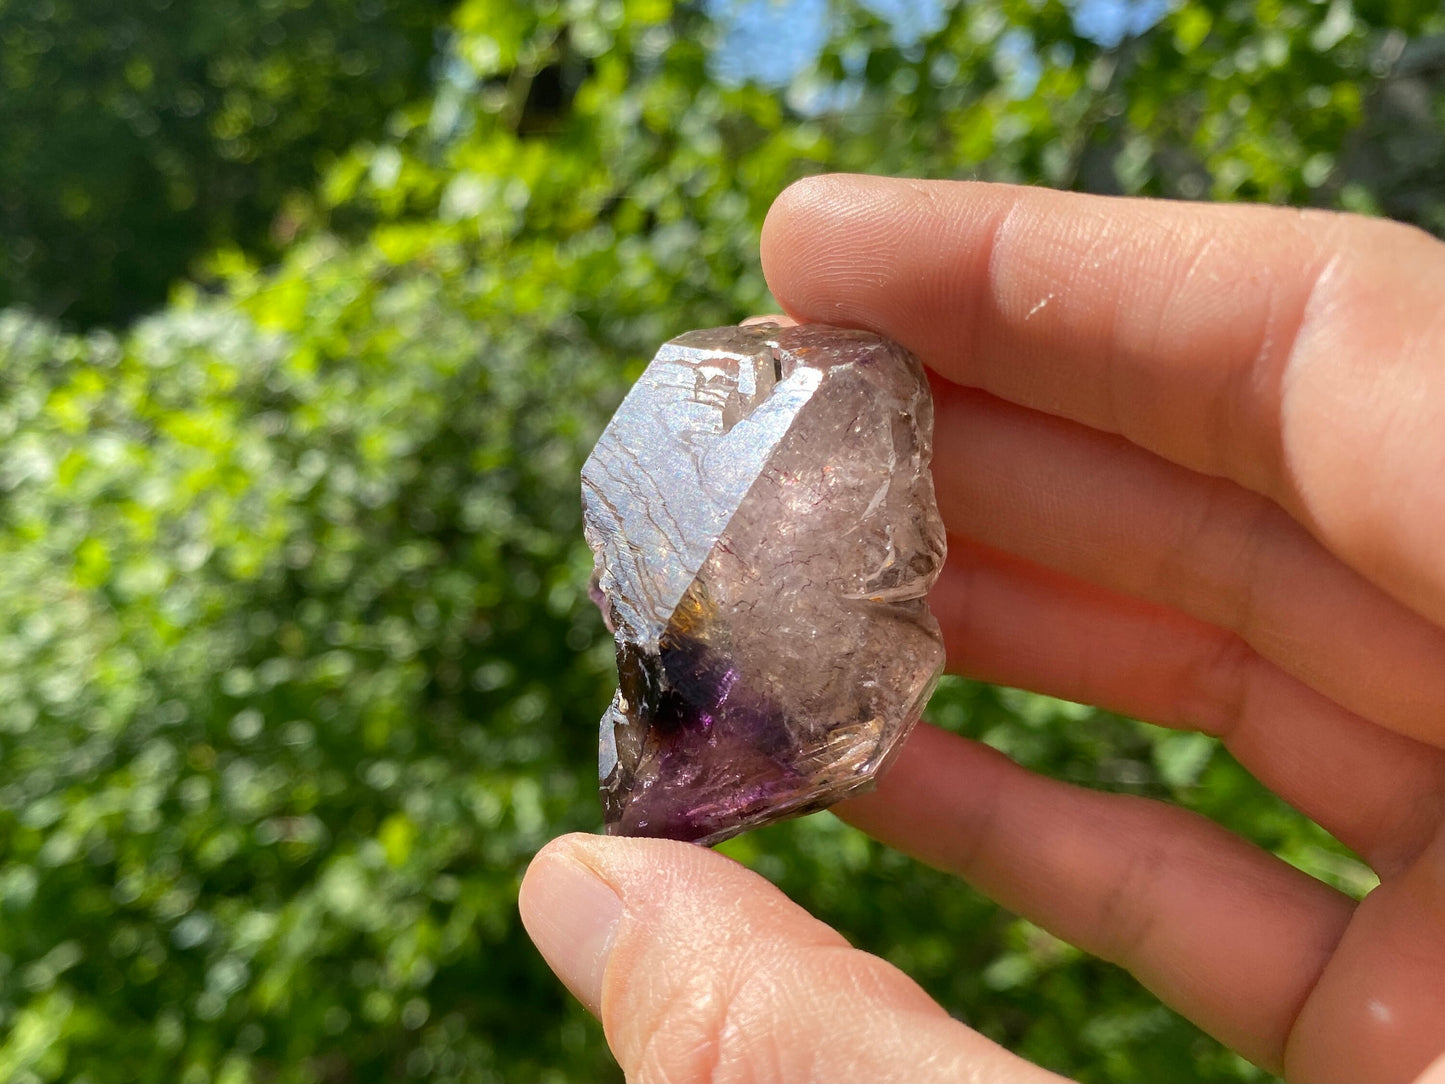 Elestial Shangaan Amethyst Crystal ~ Smoky Quartz and Amethyst with Harlequin Red Hematite inclusions- Rock Shop